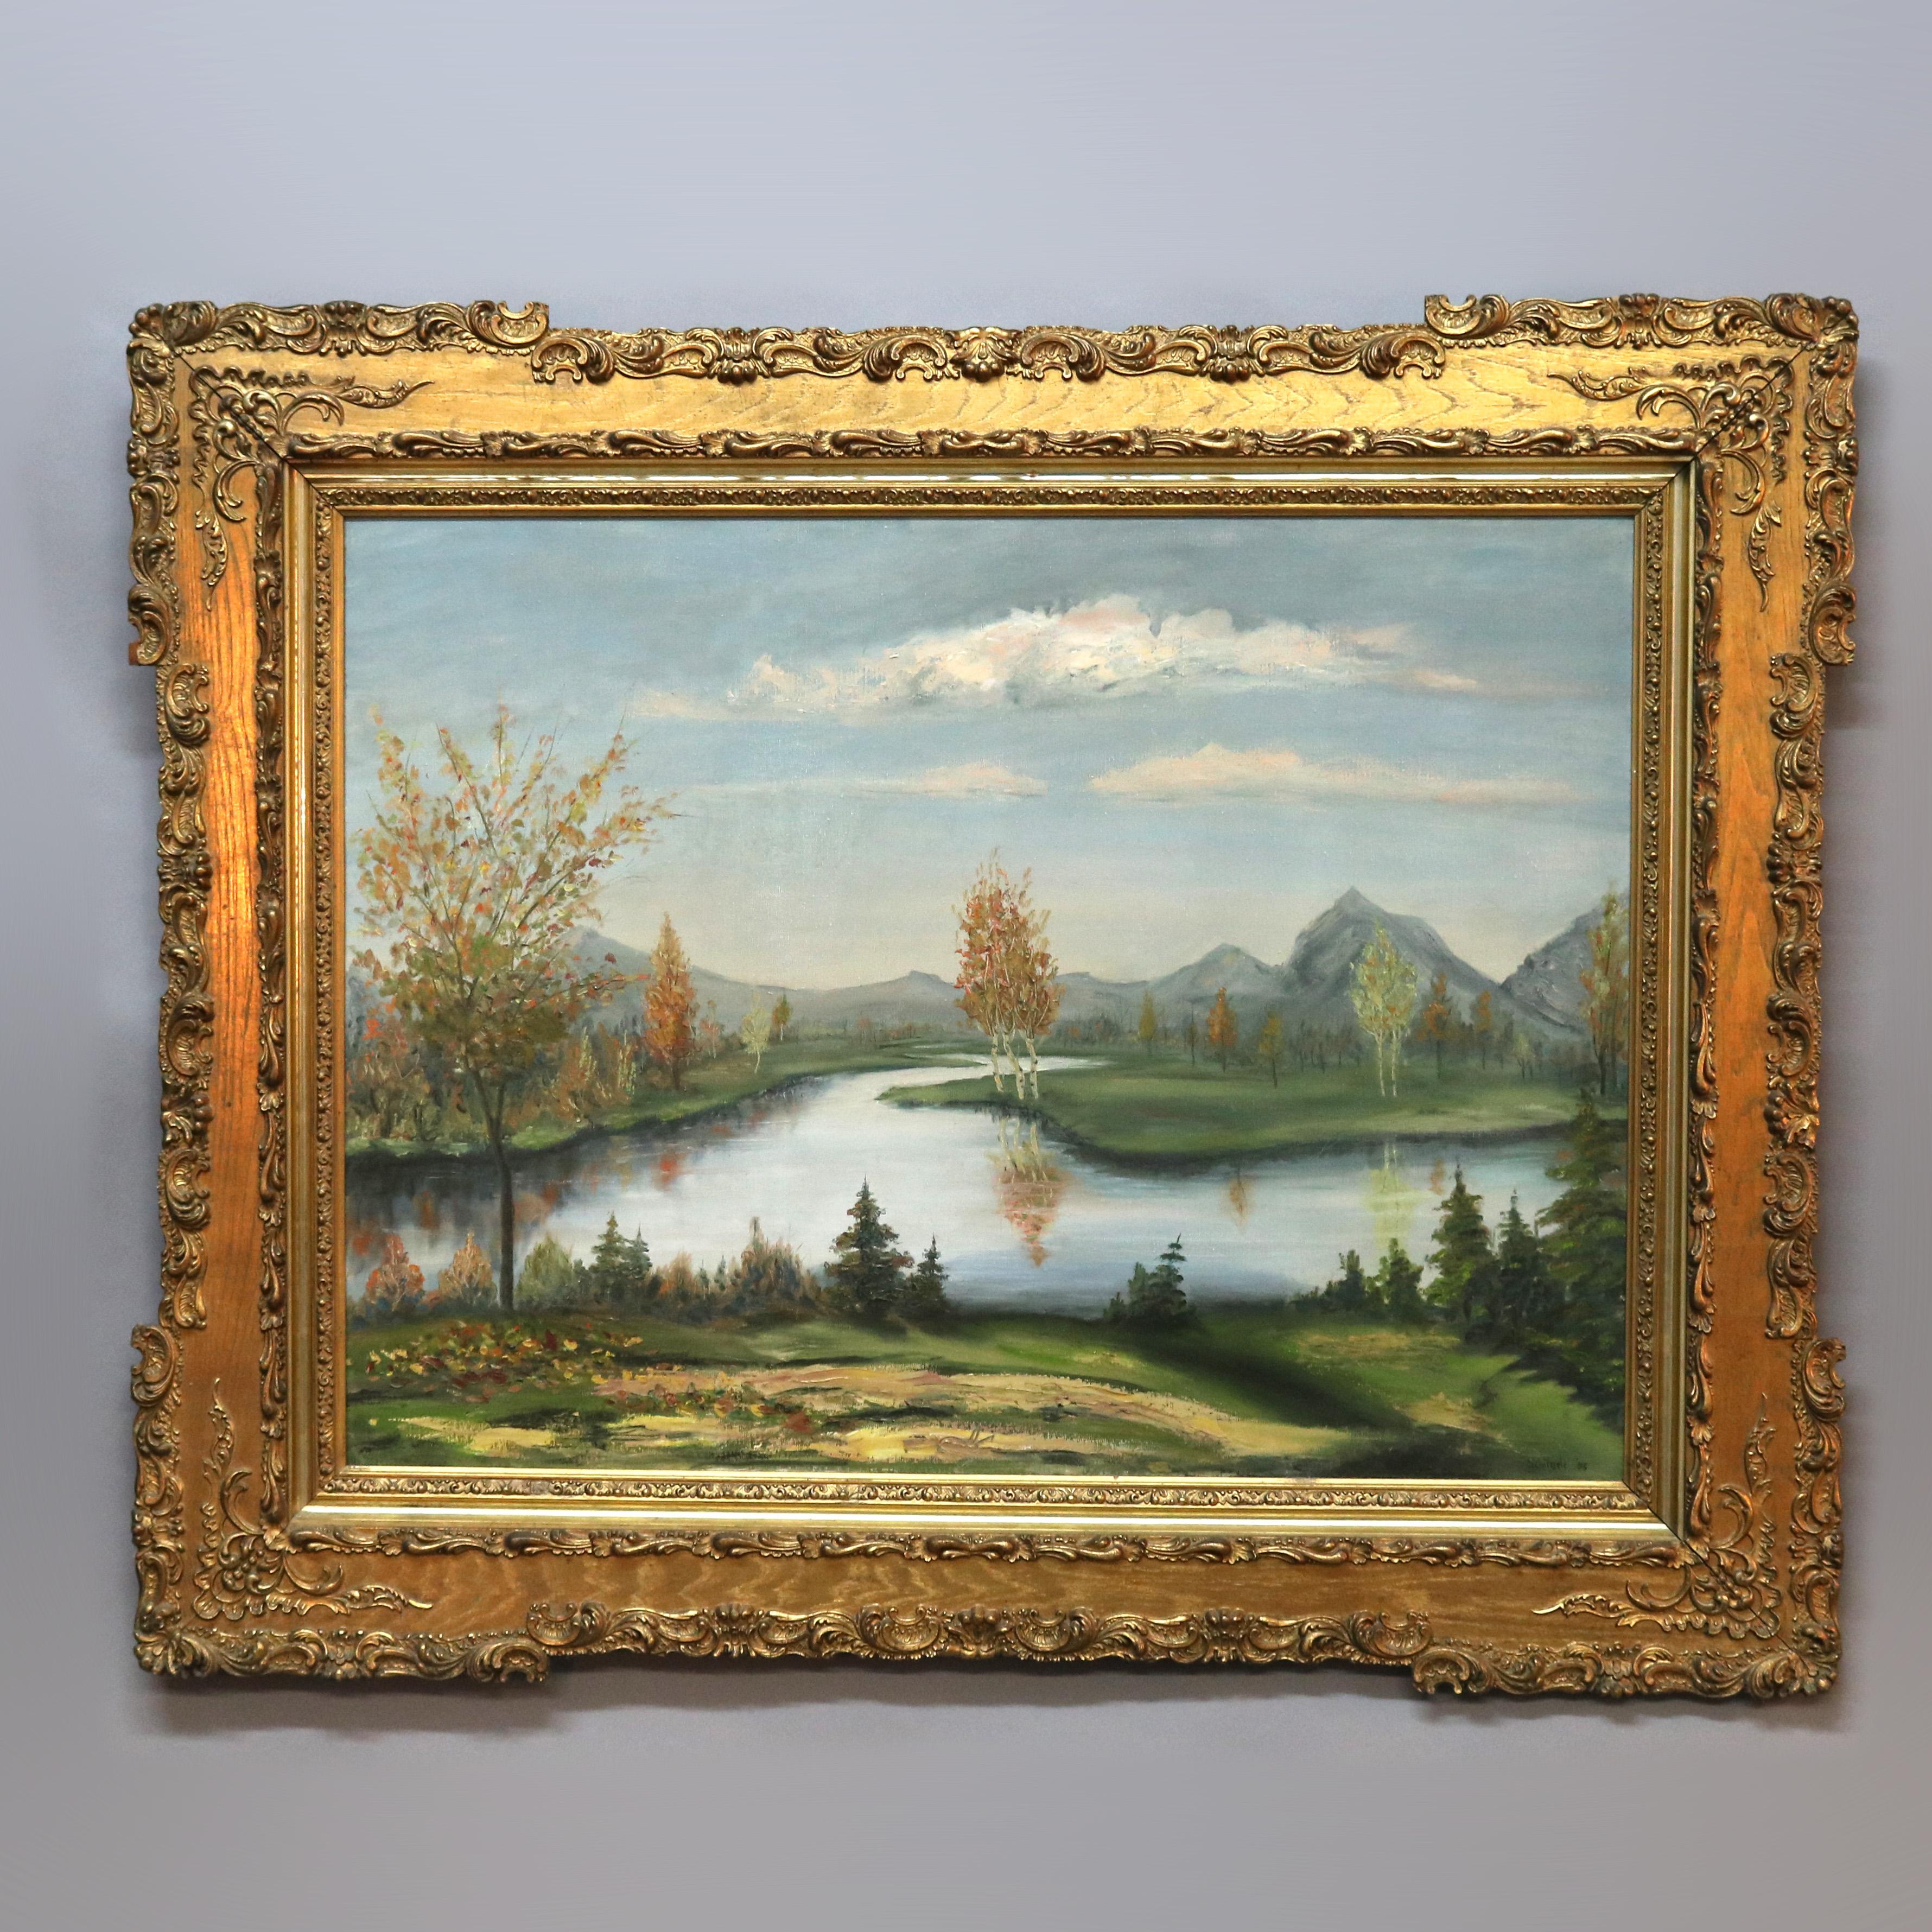 An antique and large landscape painting by Schiferle offers oil on canvas river valley scene, artist signed and dated lower left, seated in first finish giltwood frame, c1953

Measures - 42.5'' H x 52.5'' x 2.5'' D; rabbet 40'' x 30.25''; sight